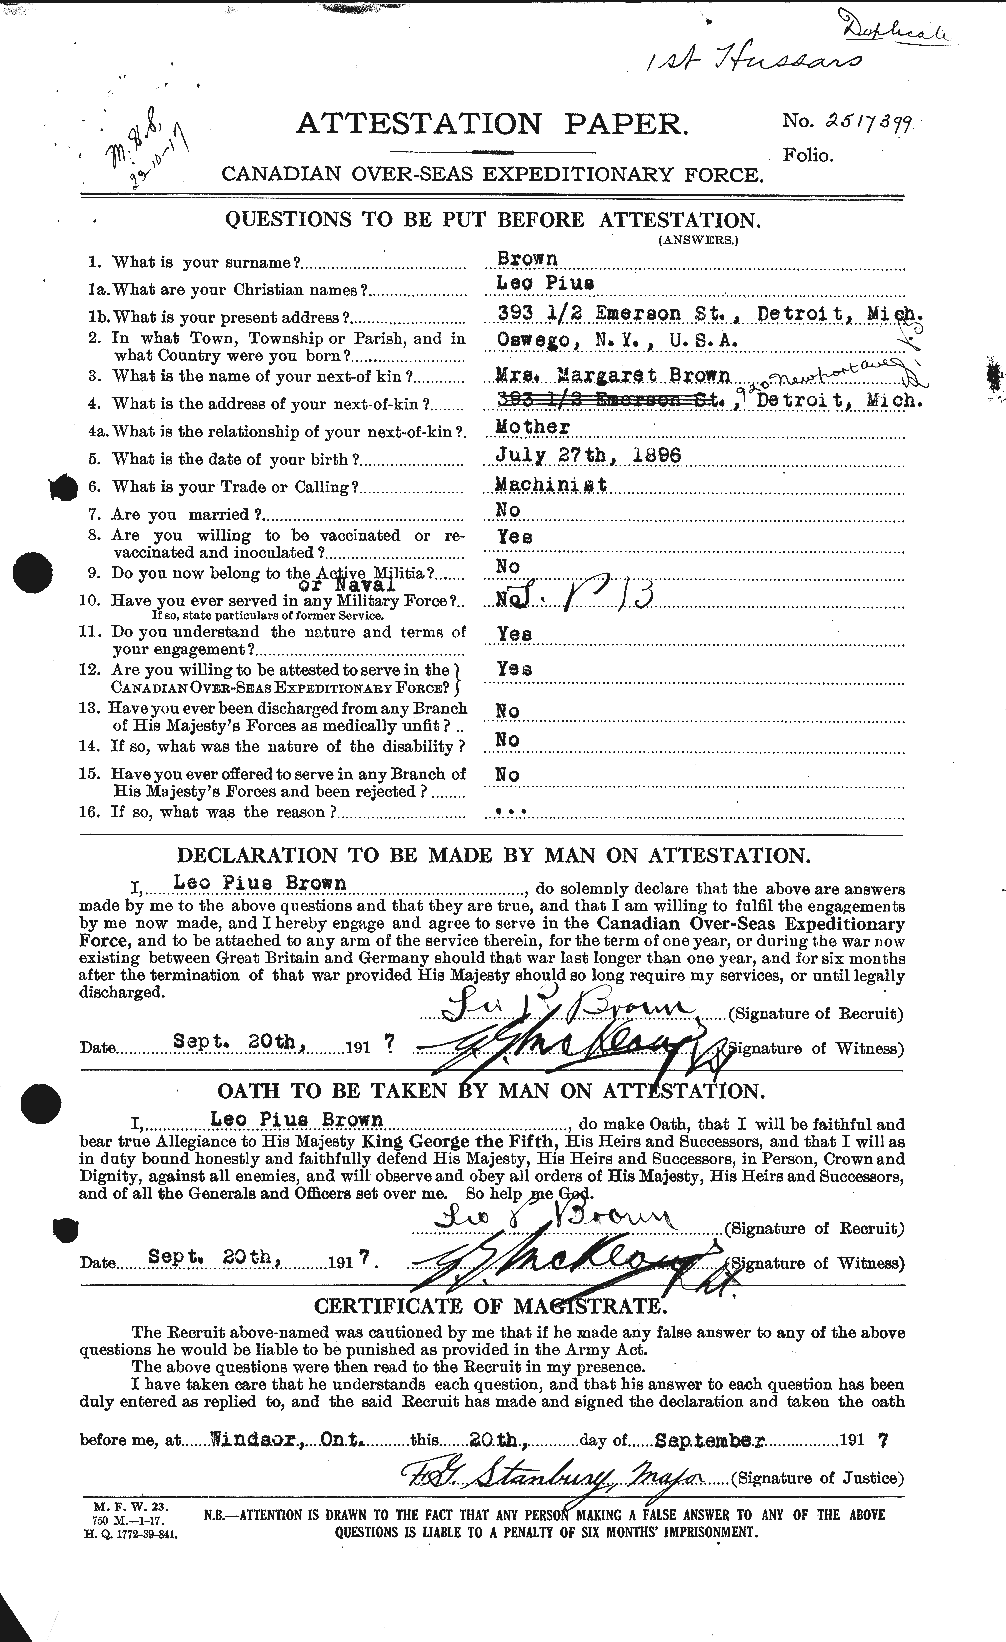 Personnel Records of the First World War - CEF 266284a